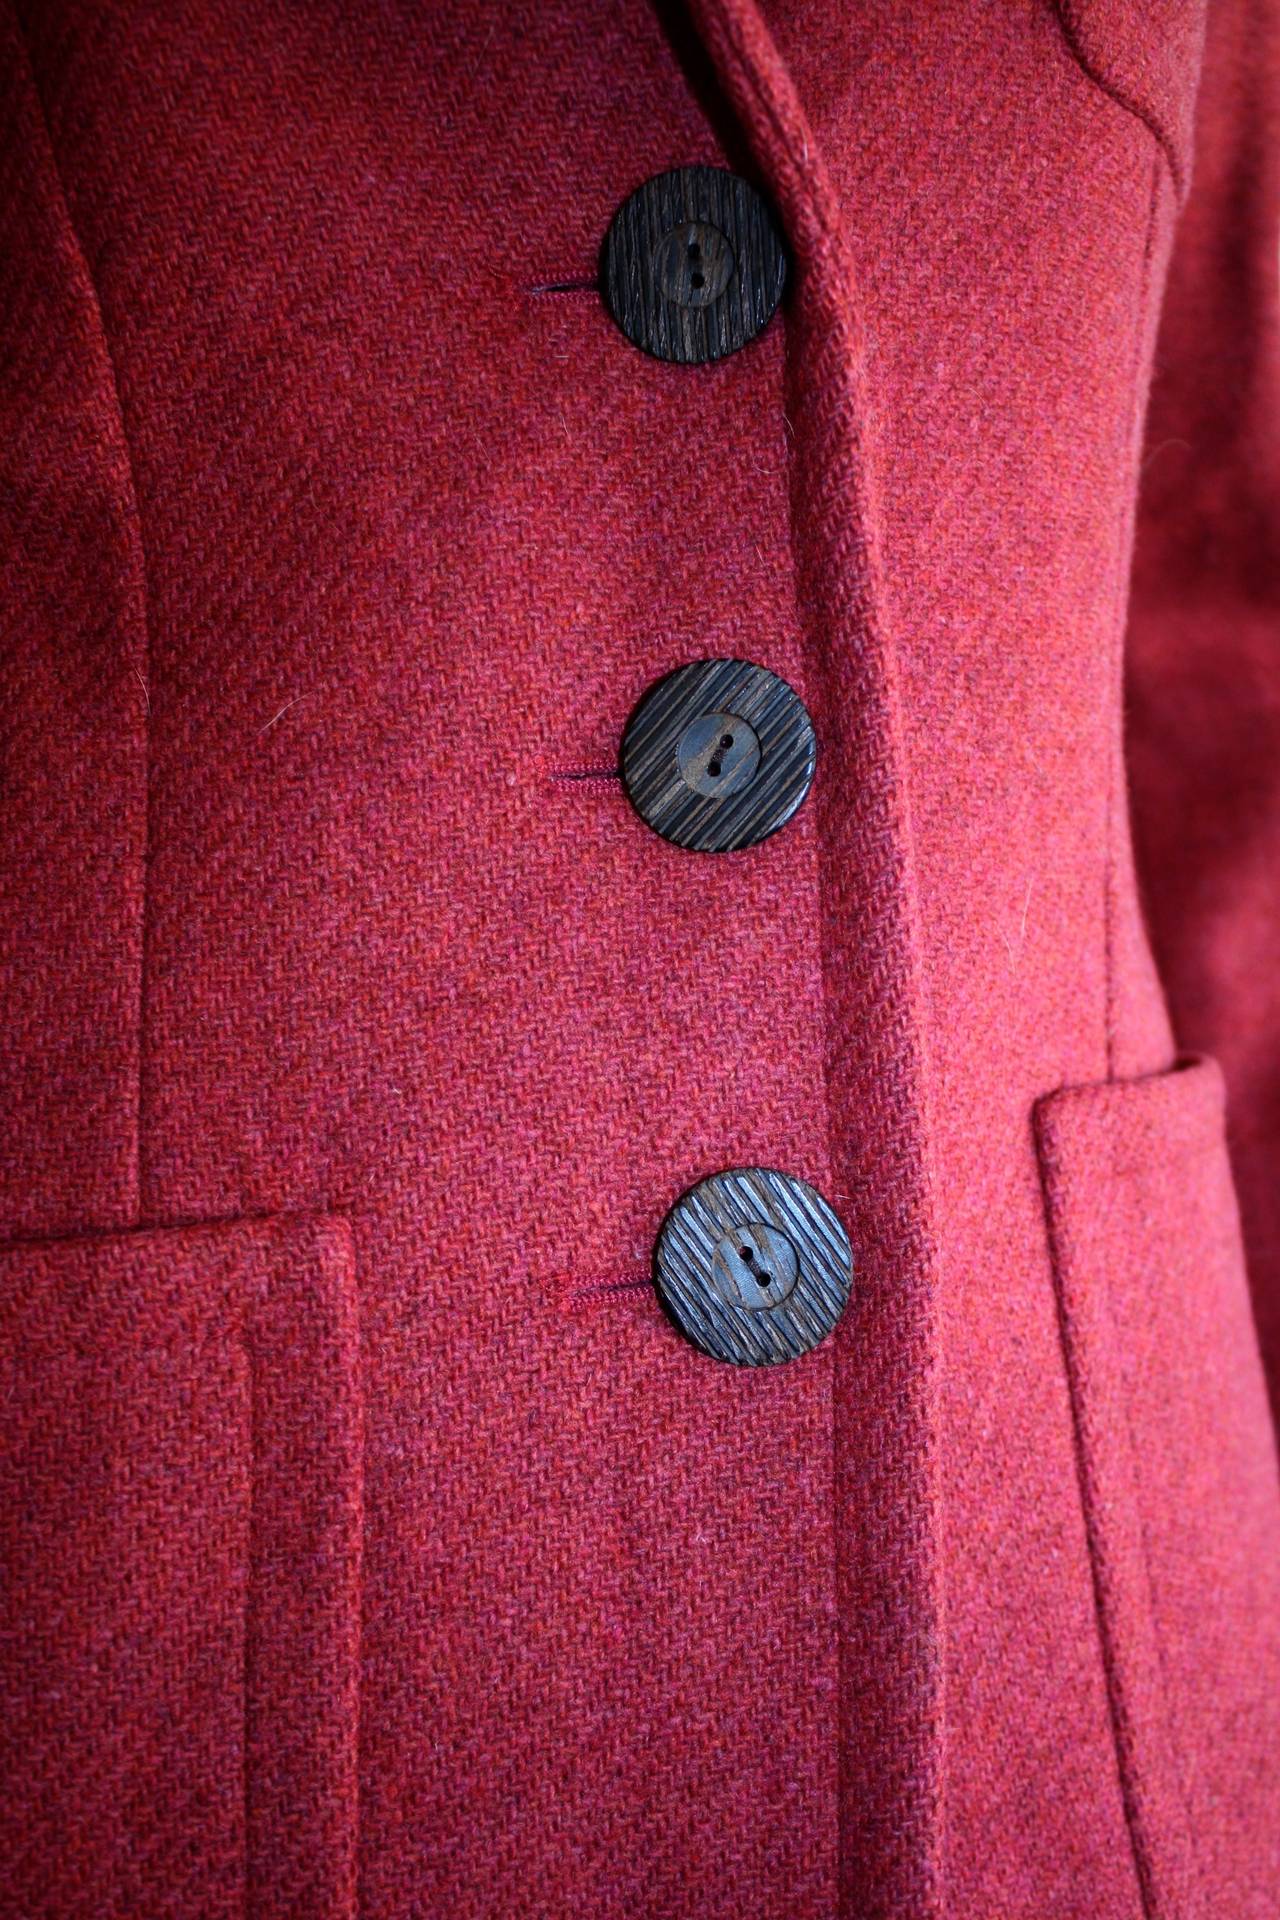 Chic vintage YSL Rive Gauche wool blazer, with wood buttons at sleeves and up bodice. Beautiful raspberry color. Fully lined. In great condition. Marked Size EU 36 (US Size 2-4)